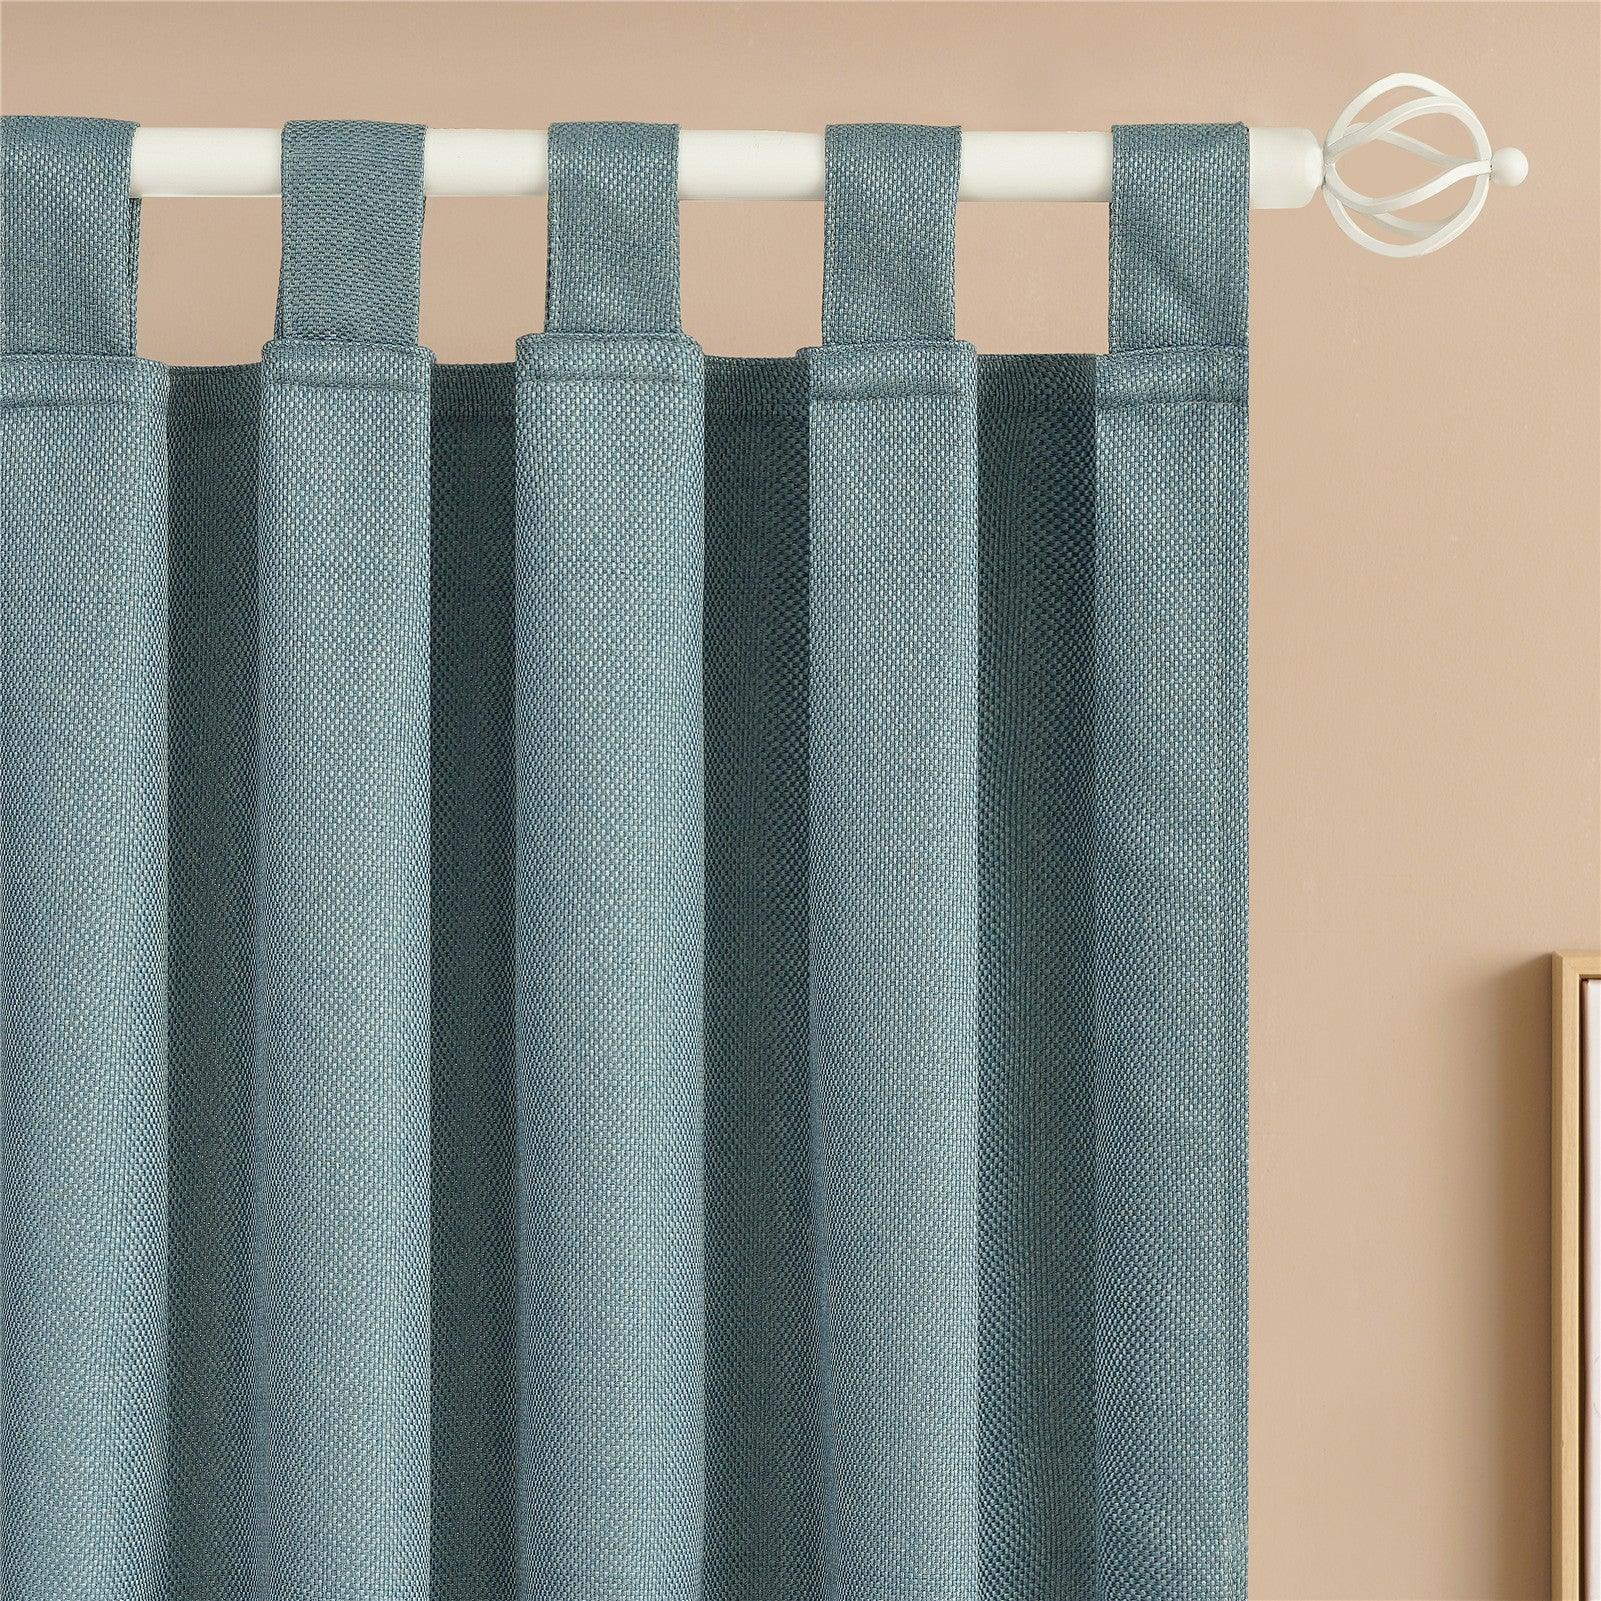 Curtainsdesign-Linen Textured Blackout Thermal Curtains Tab Top Design Privacy Protecting For Bedroom,1 Panel - Topfinel